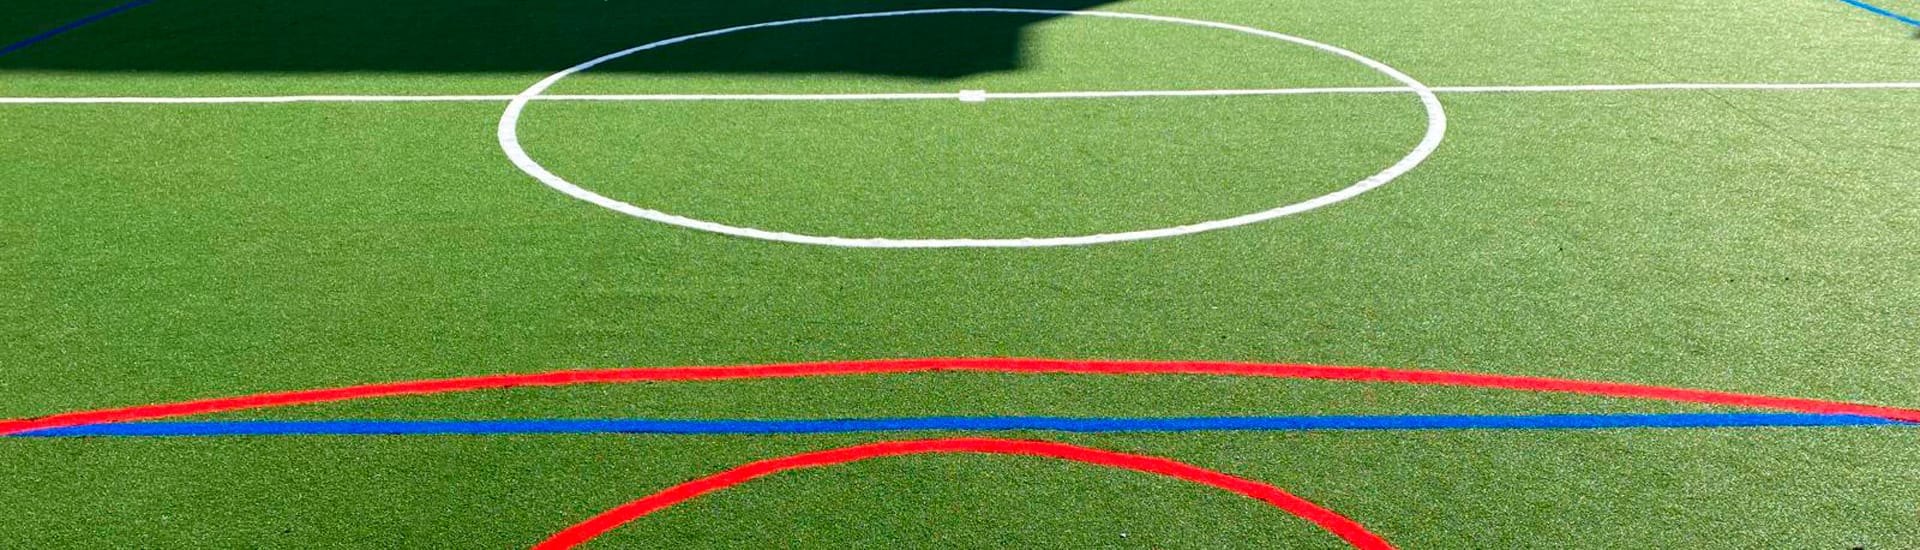 multisports artificial turf